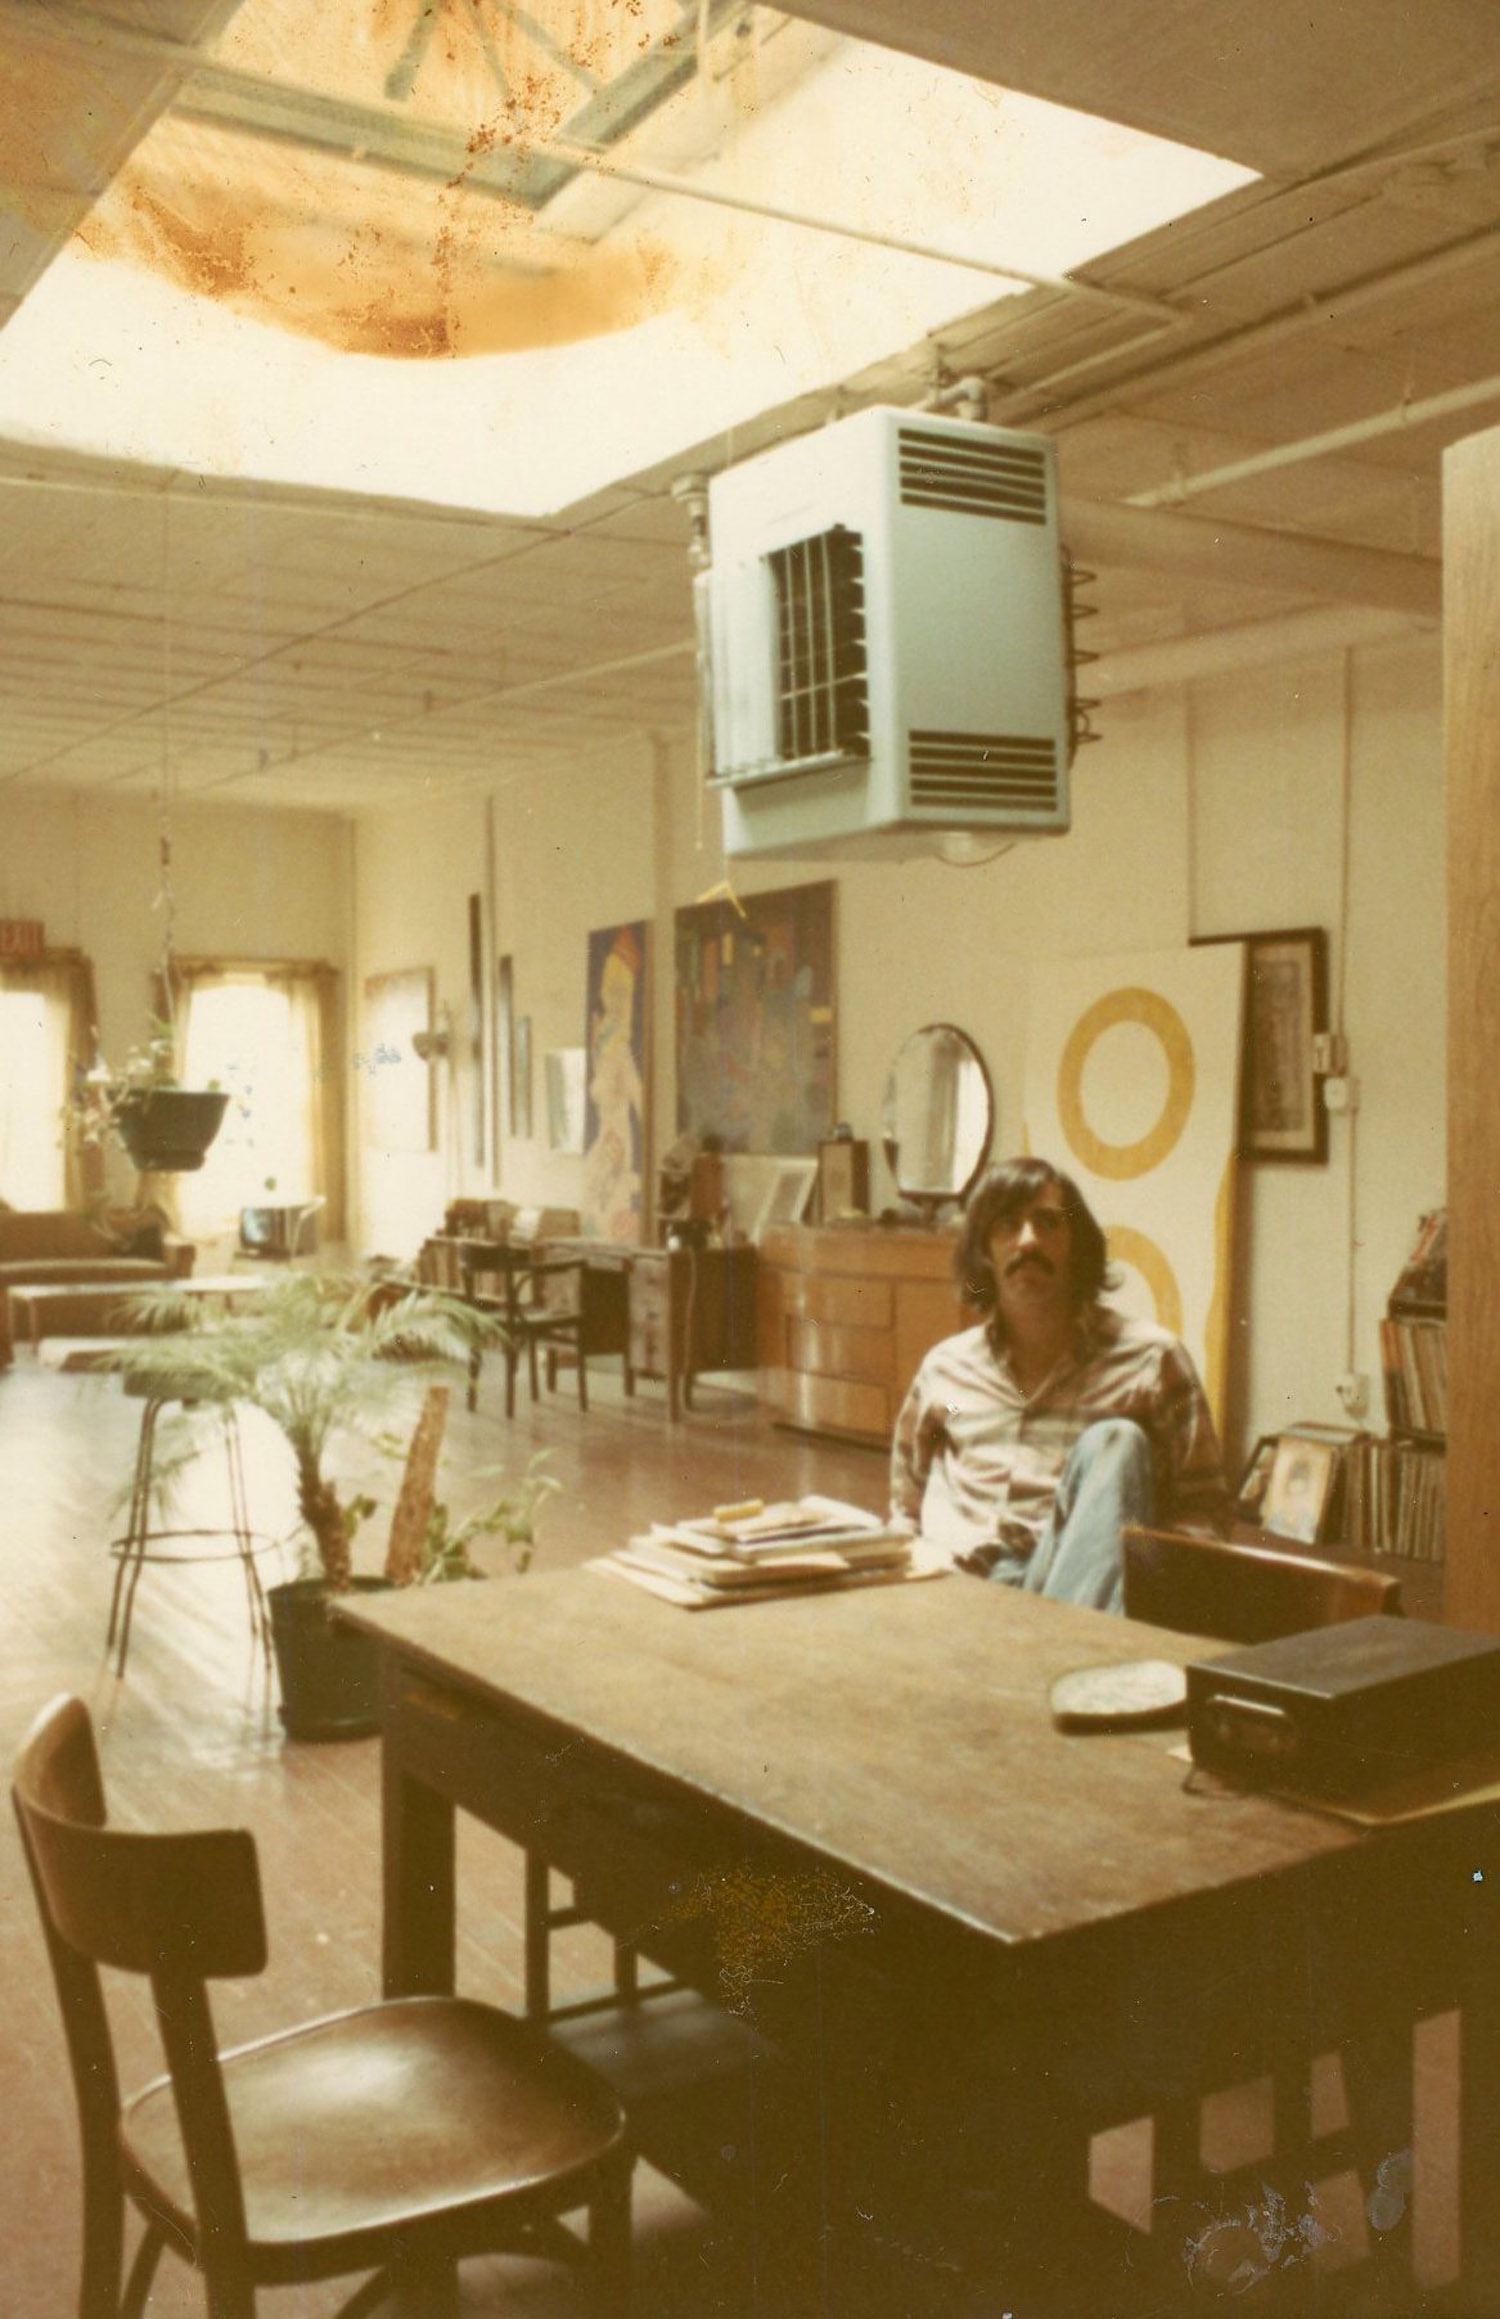 Marc at the dining room table with Tom Wolf's painting behind him, c. 1972.